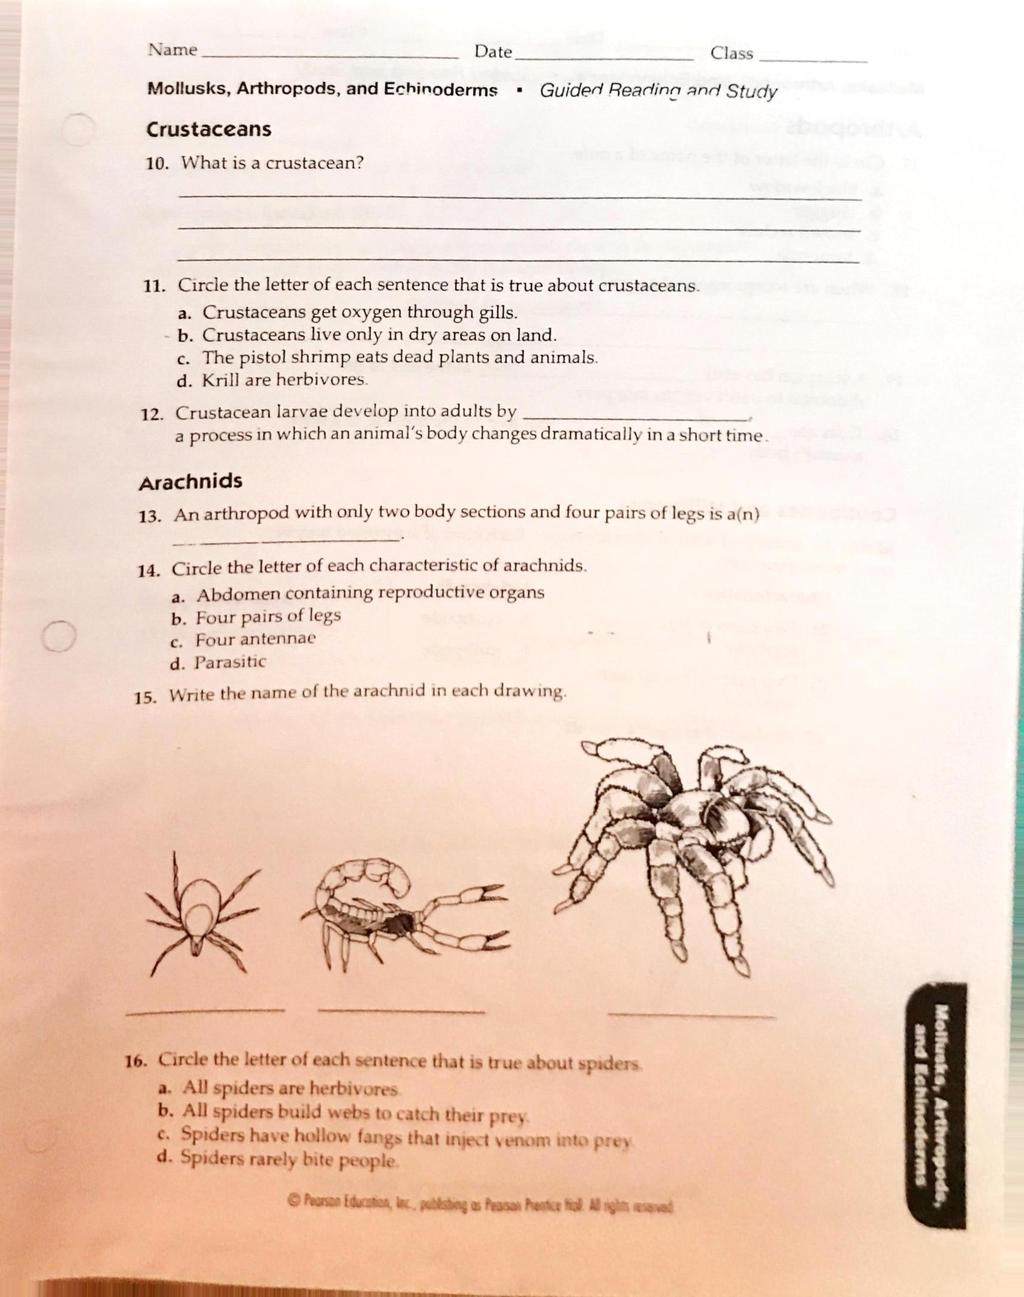 Name Da te Class Crustaceans 10. What is a crustacean? 11. Circle the letter of each sentence that is true about crustaceans. a. Crustaceans get oxygen through gills. b.